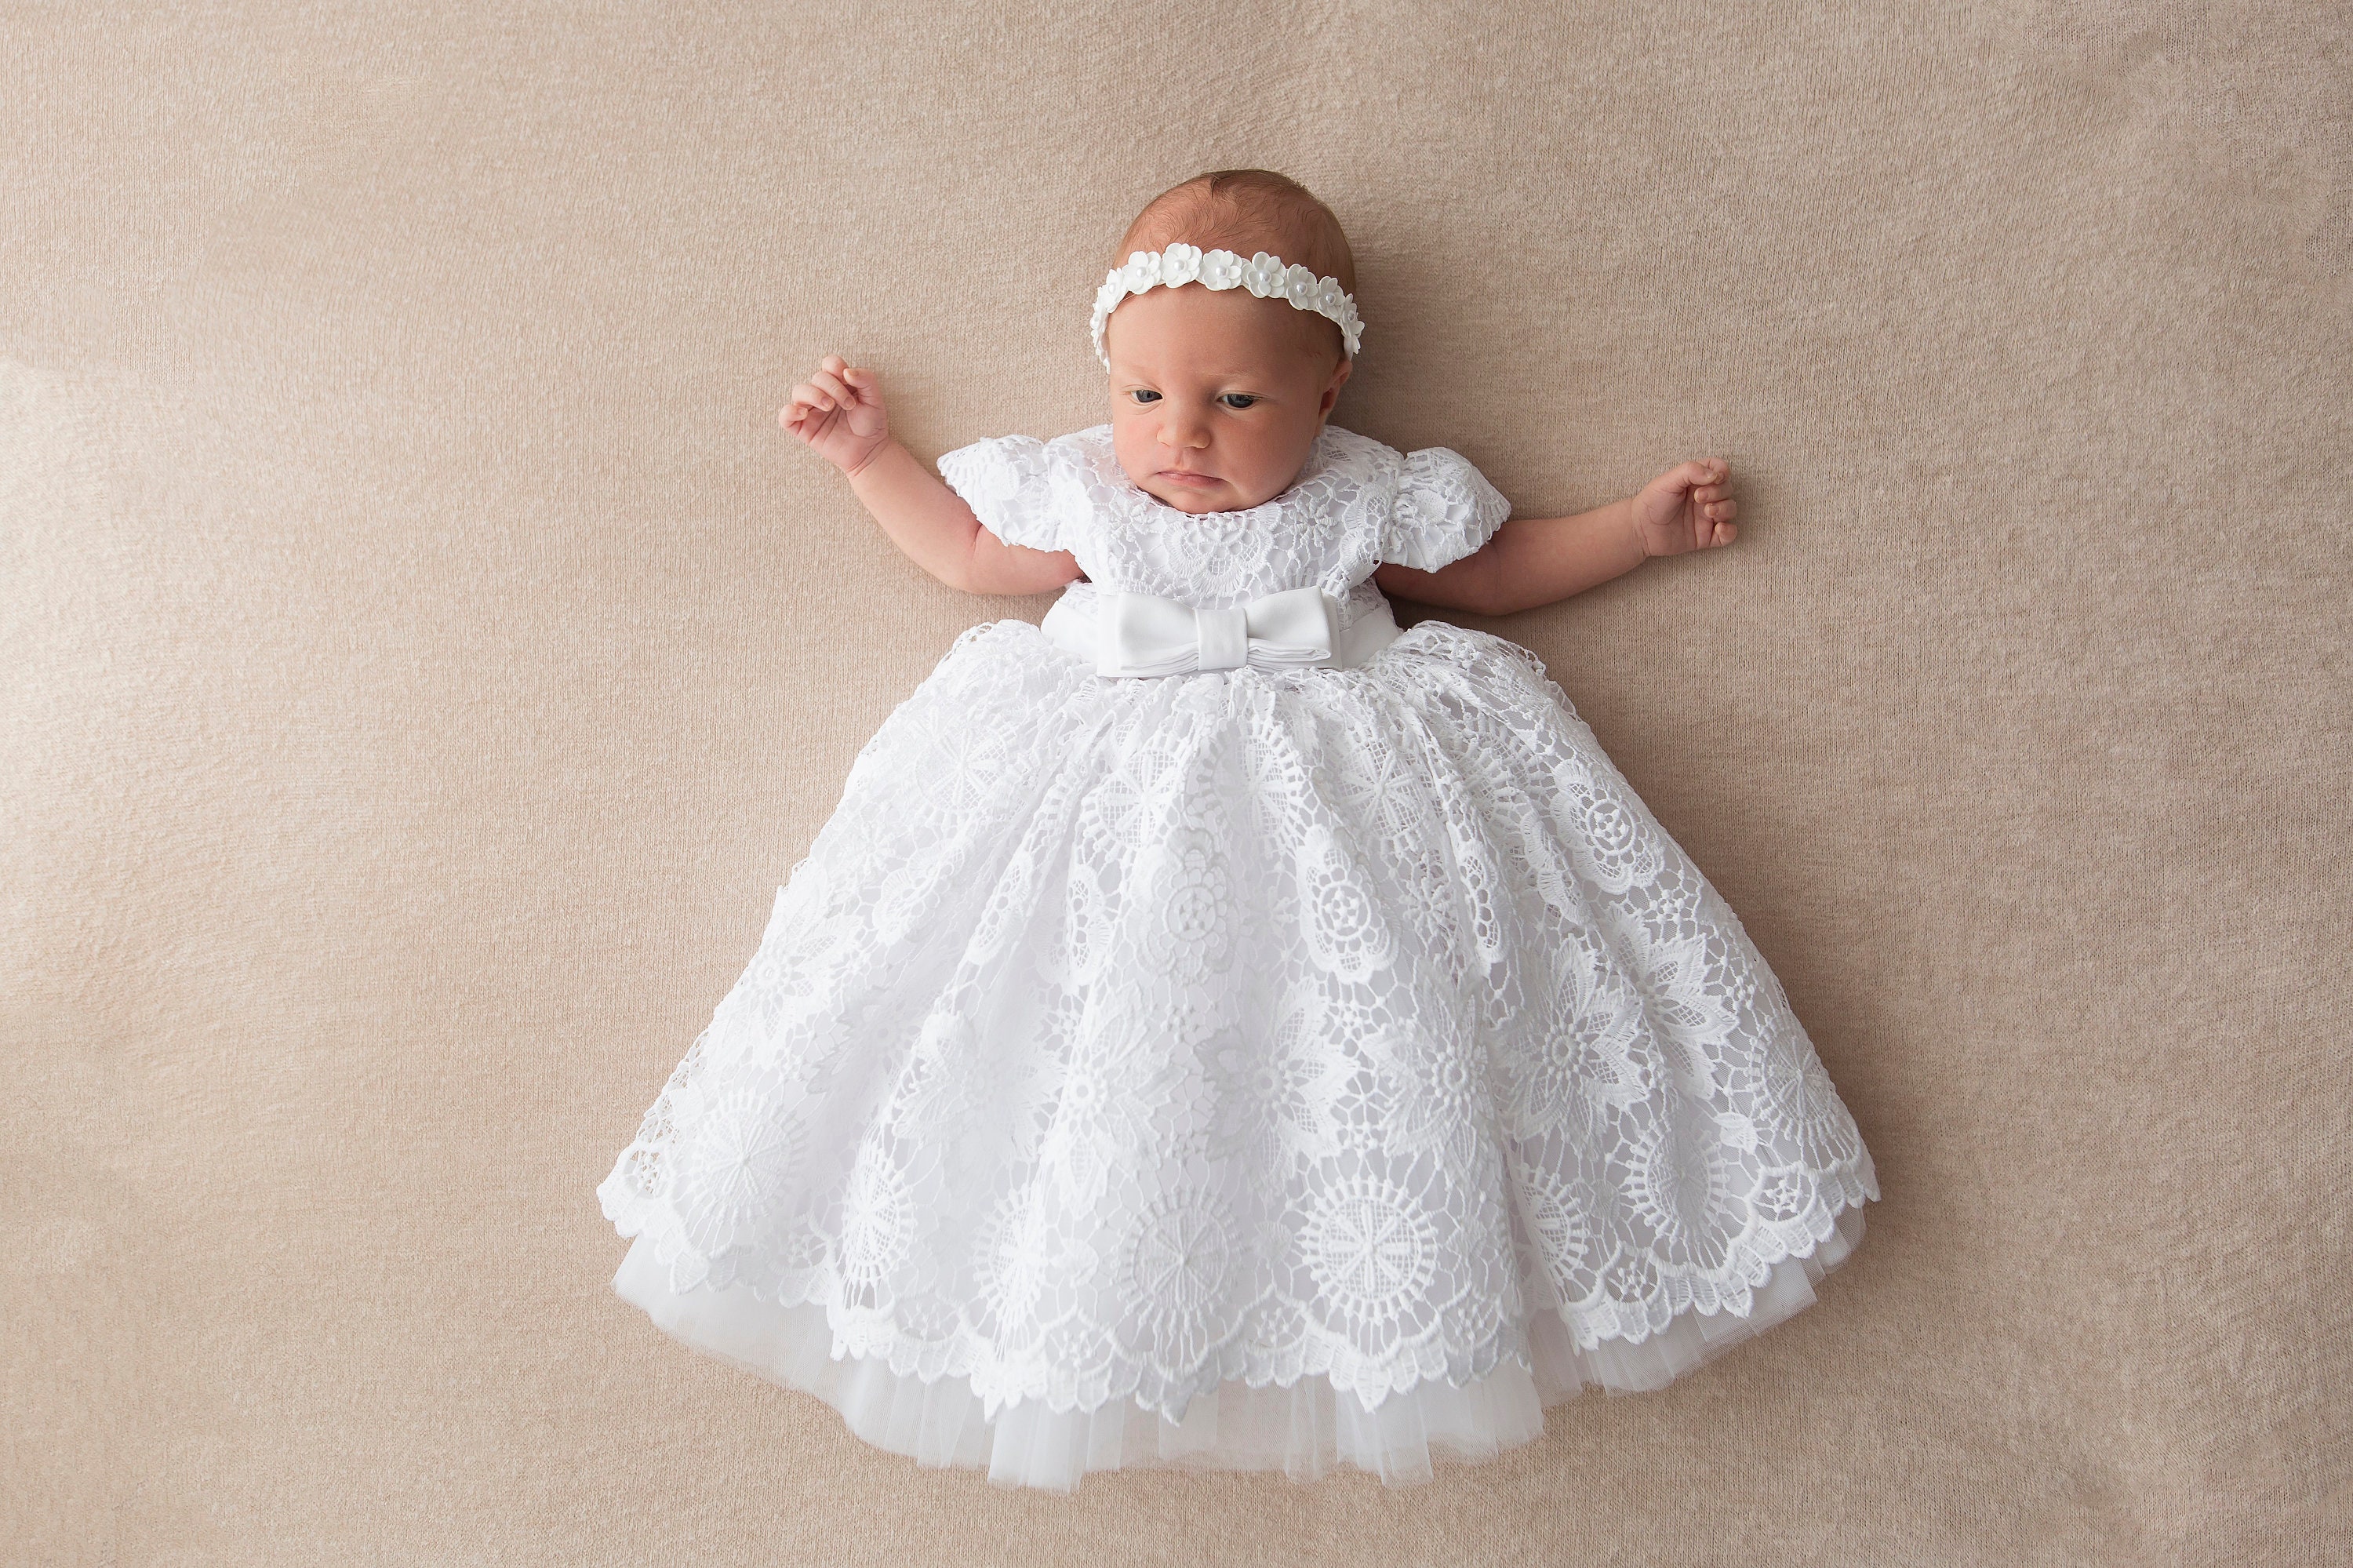 Fuomomo White Lace Satin Baby Girls Lace Dress Christening Baptism Gowns  Outfit with Bonnet 0-24 Months : Amazon.co.uk: Fashion